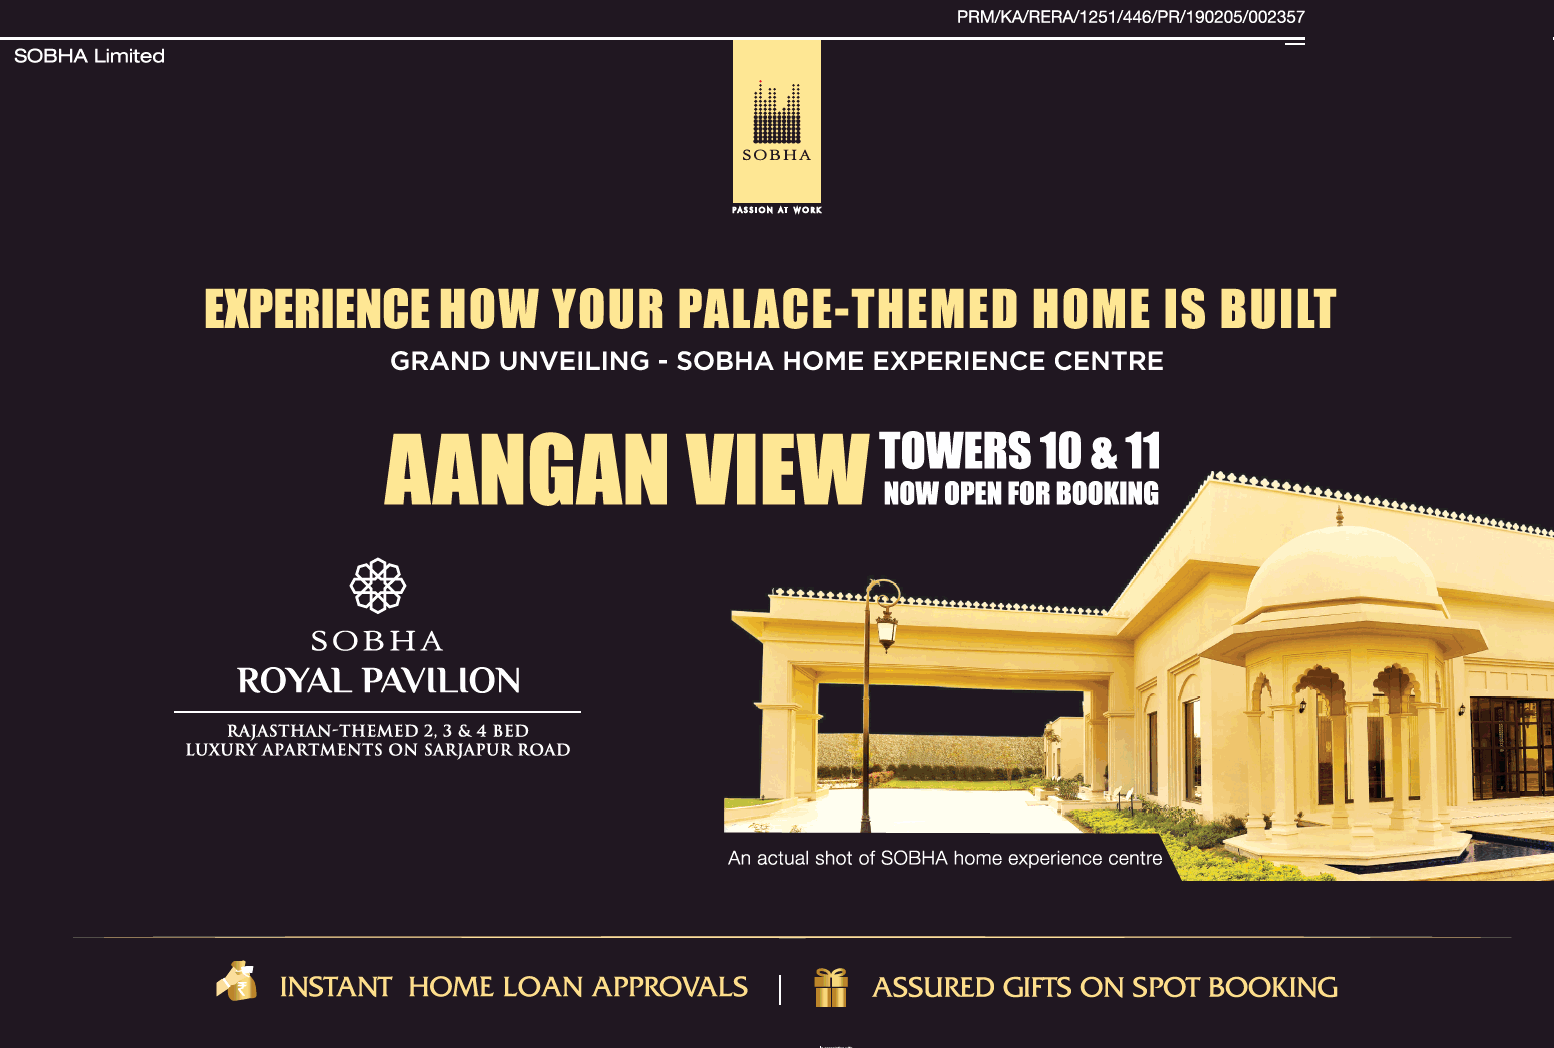 Rajasthan themed 2, 3 and 4 BHK luxury apartments at Sobha Royal Pavilion in Bangalore Update